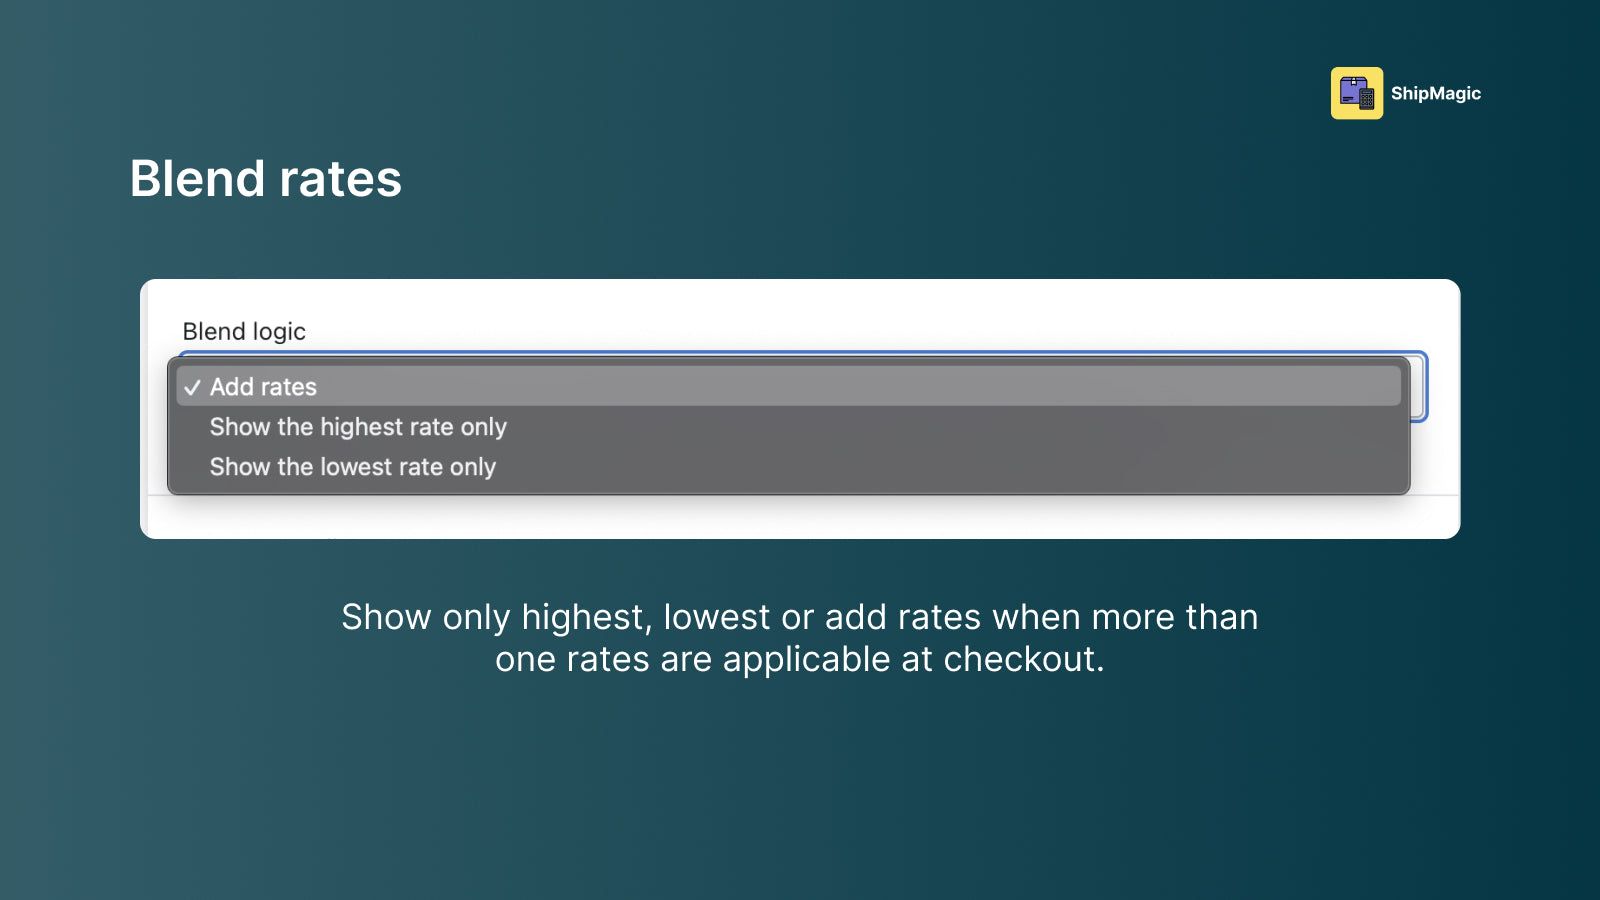 Blend rates when more than one rates are applicable at checkout.